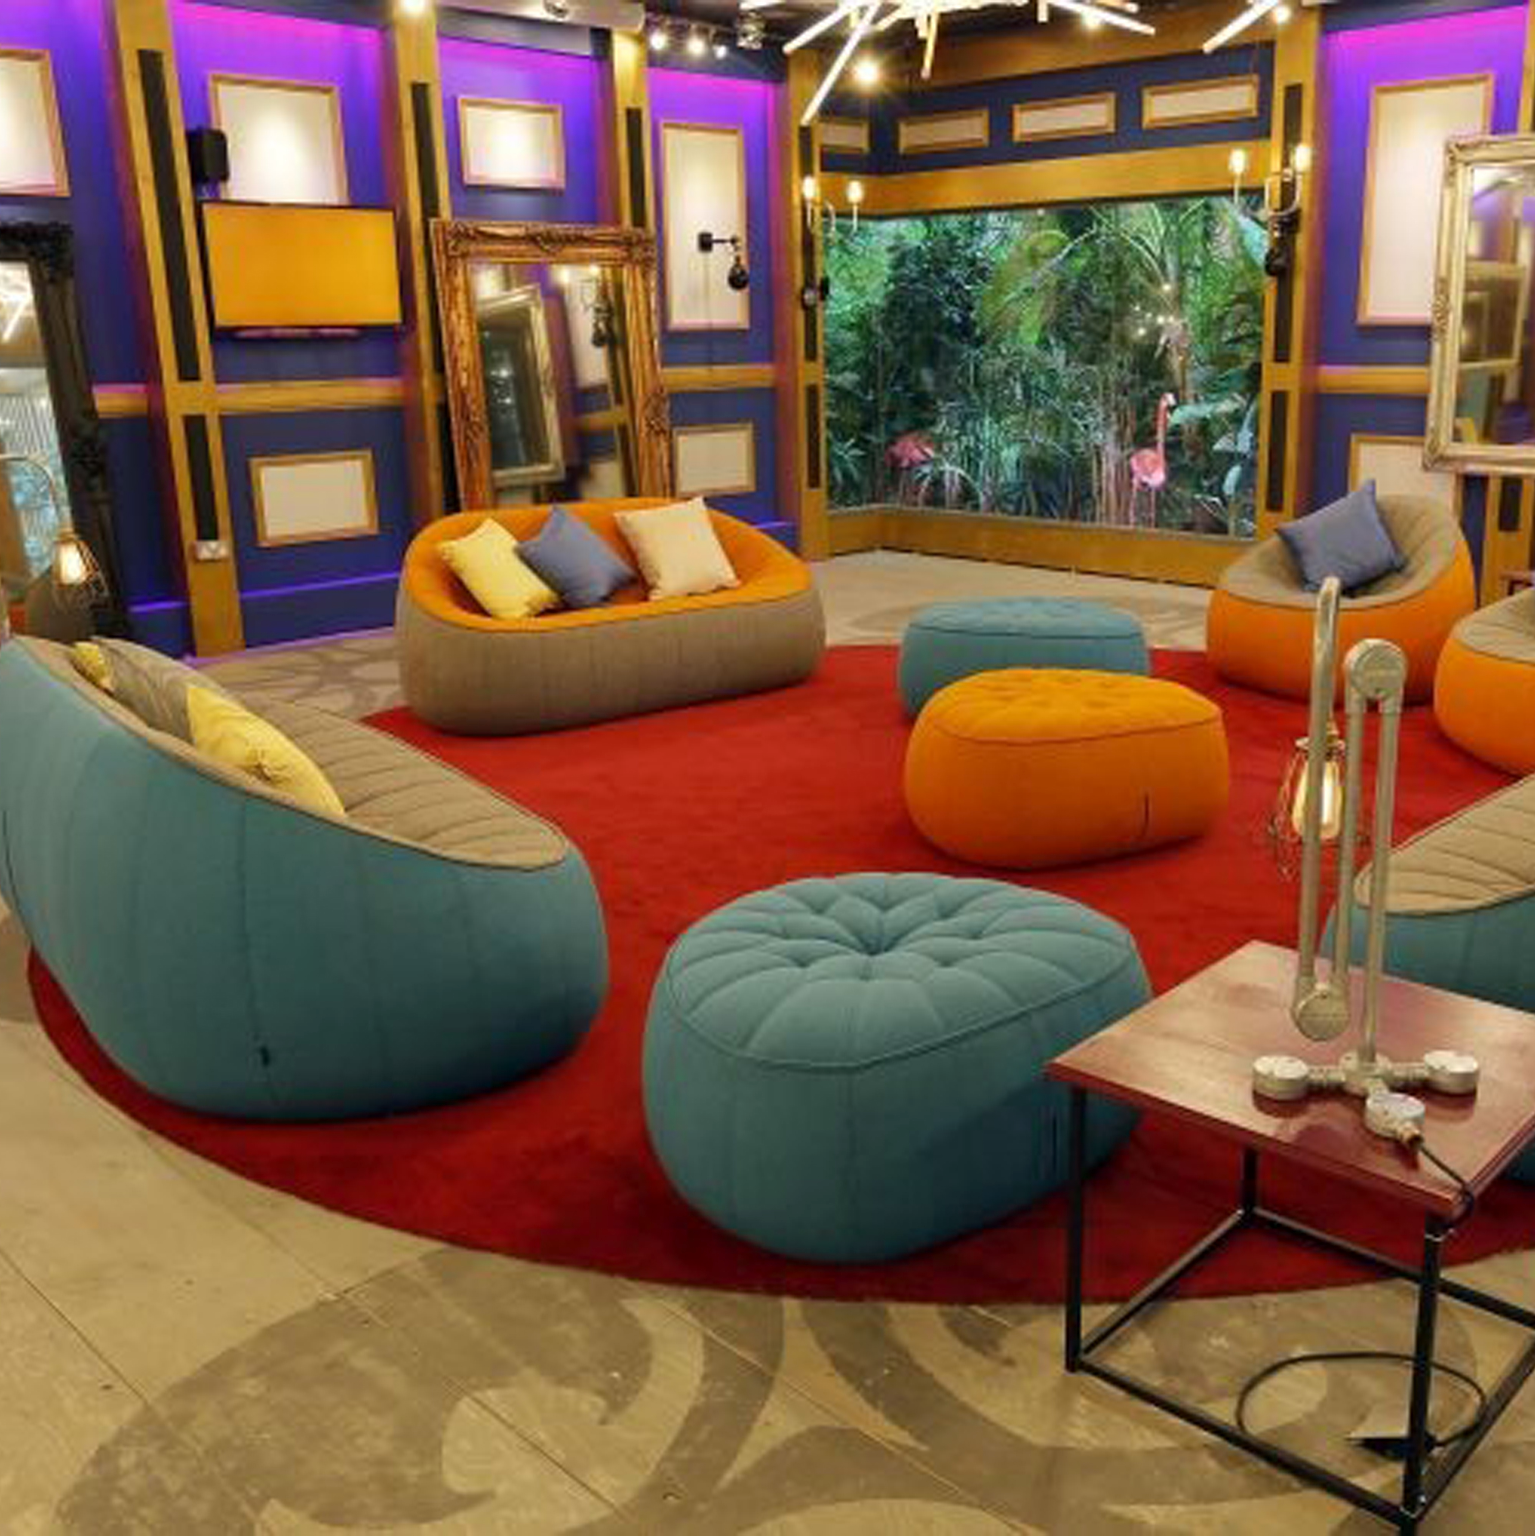 Hundreds prepare to go on sell-out tours of the Big Brother house at Elstree Studios, Hertfordshire